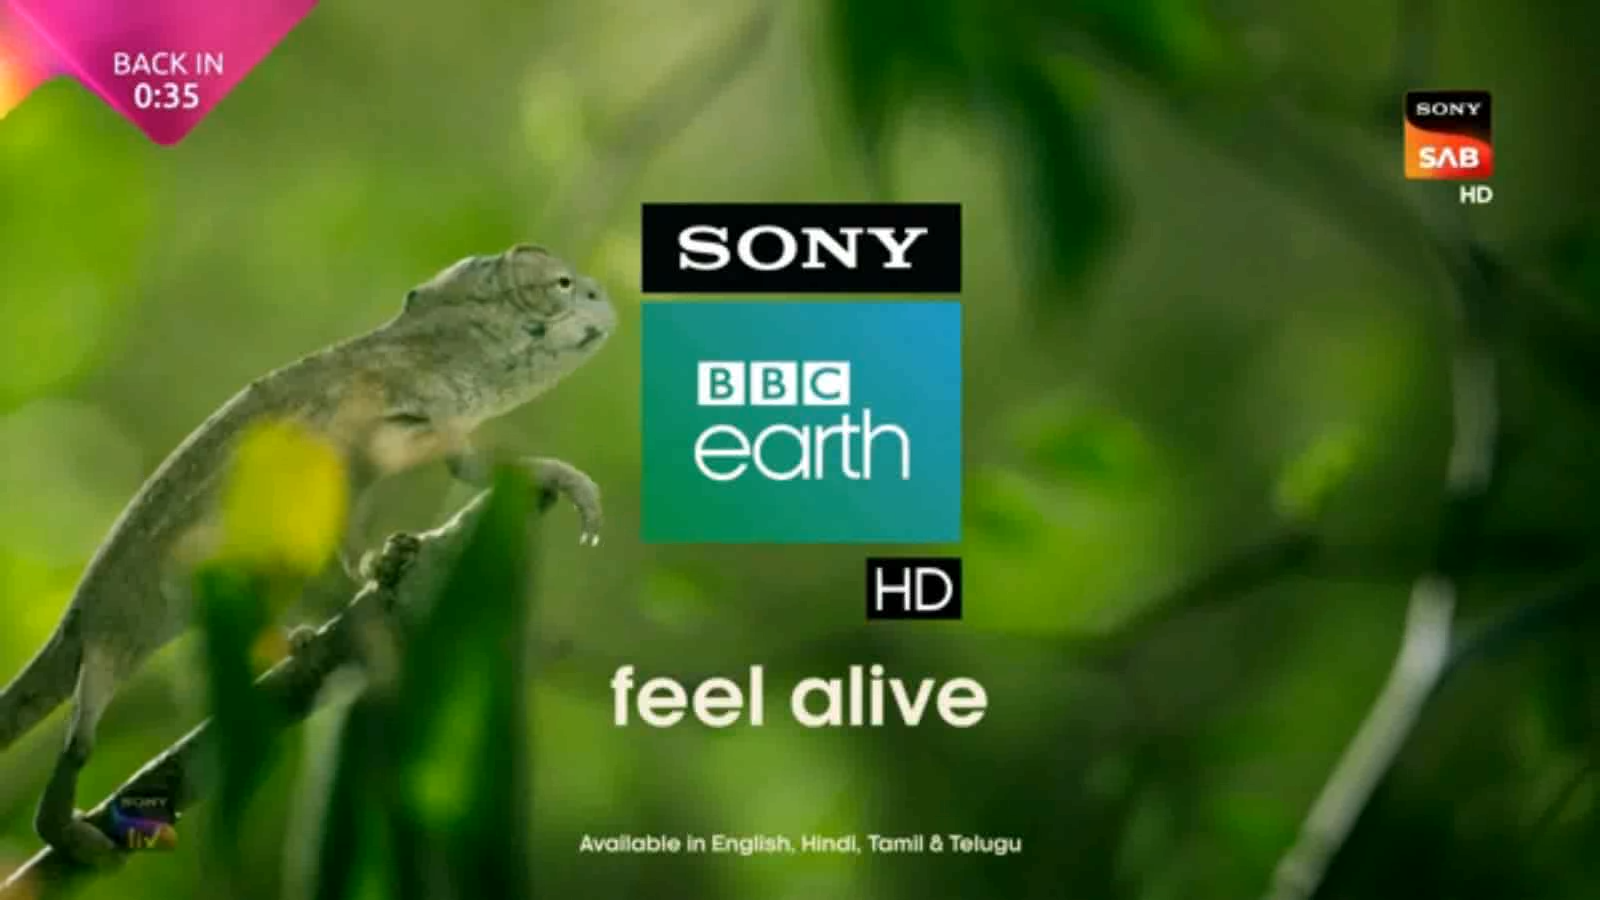 your unscheduled sony bbc earth intermission 2.png